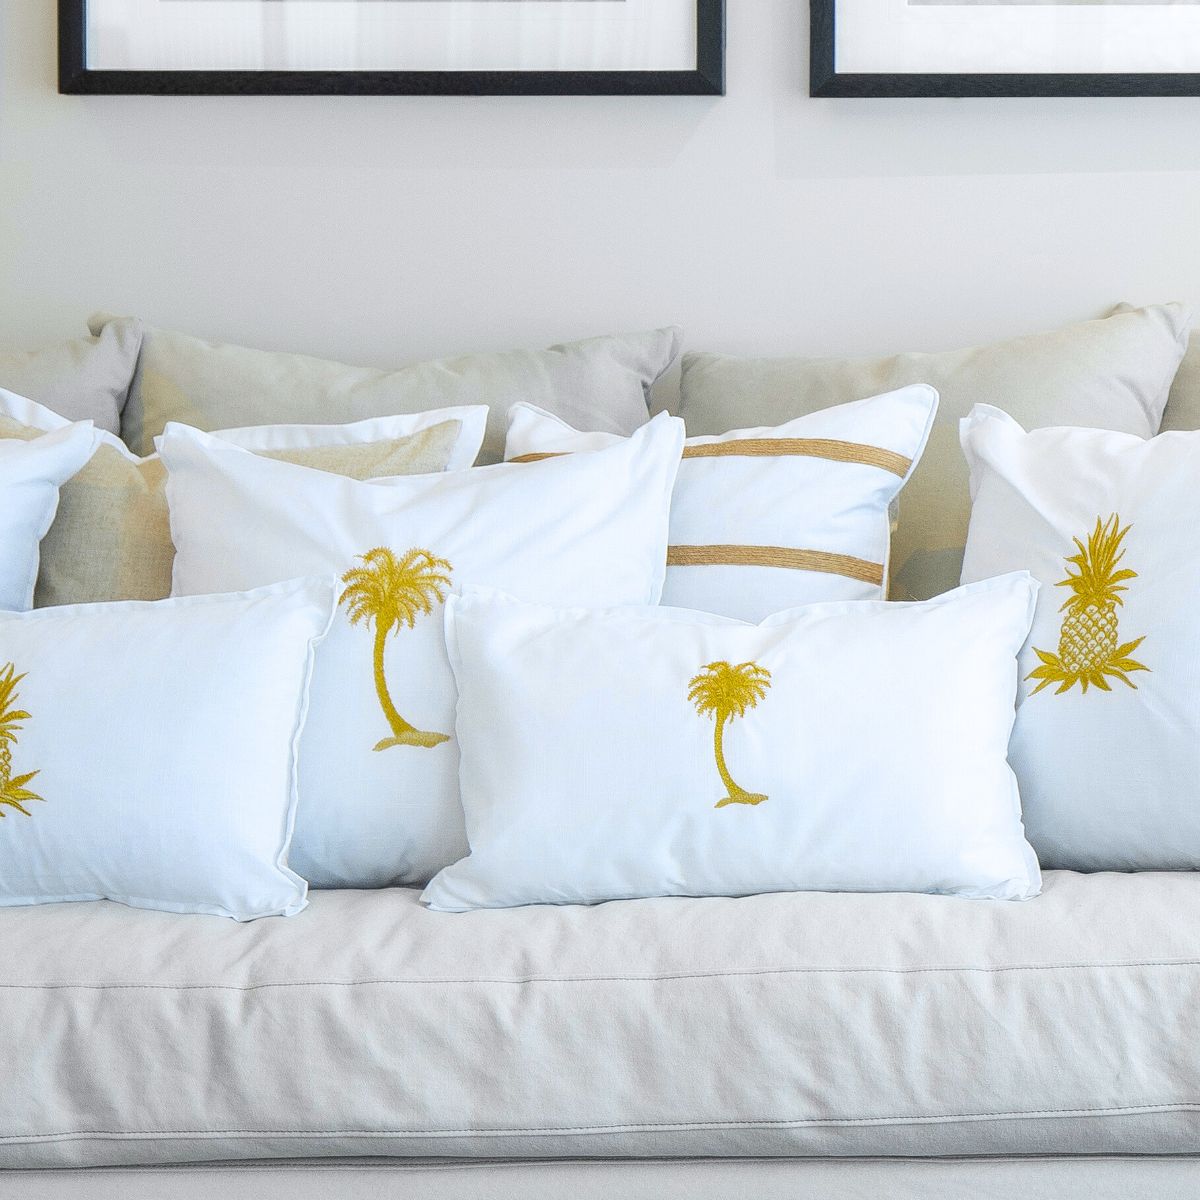 HABANA White and Gold Palm Tree Cushion Cover 30 cm by 50 cm | Hamptons Home